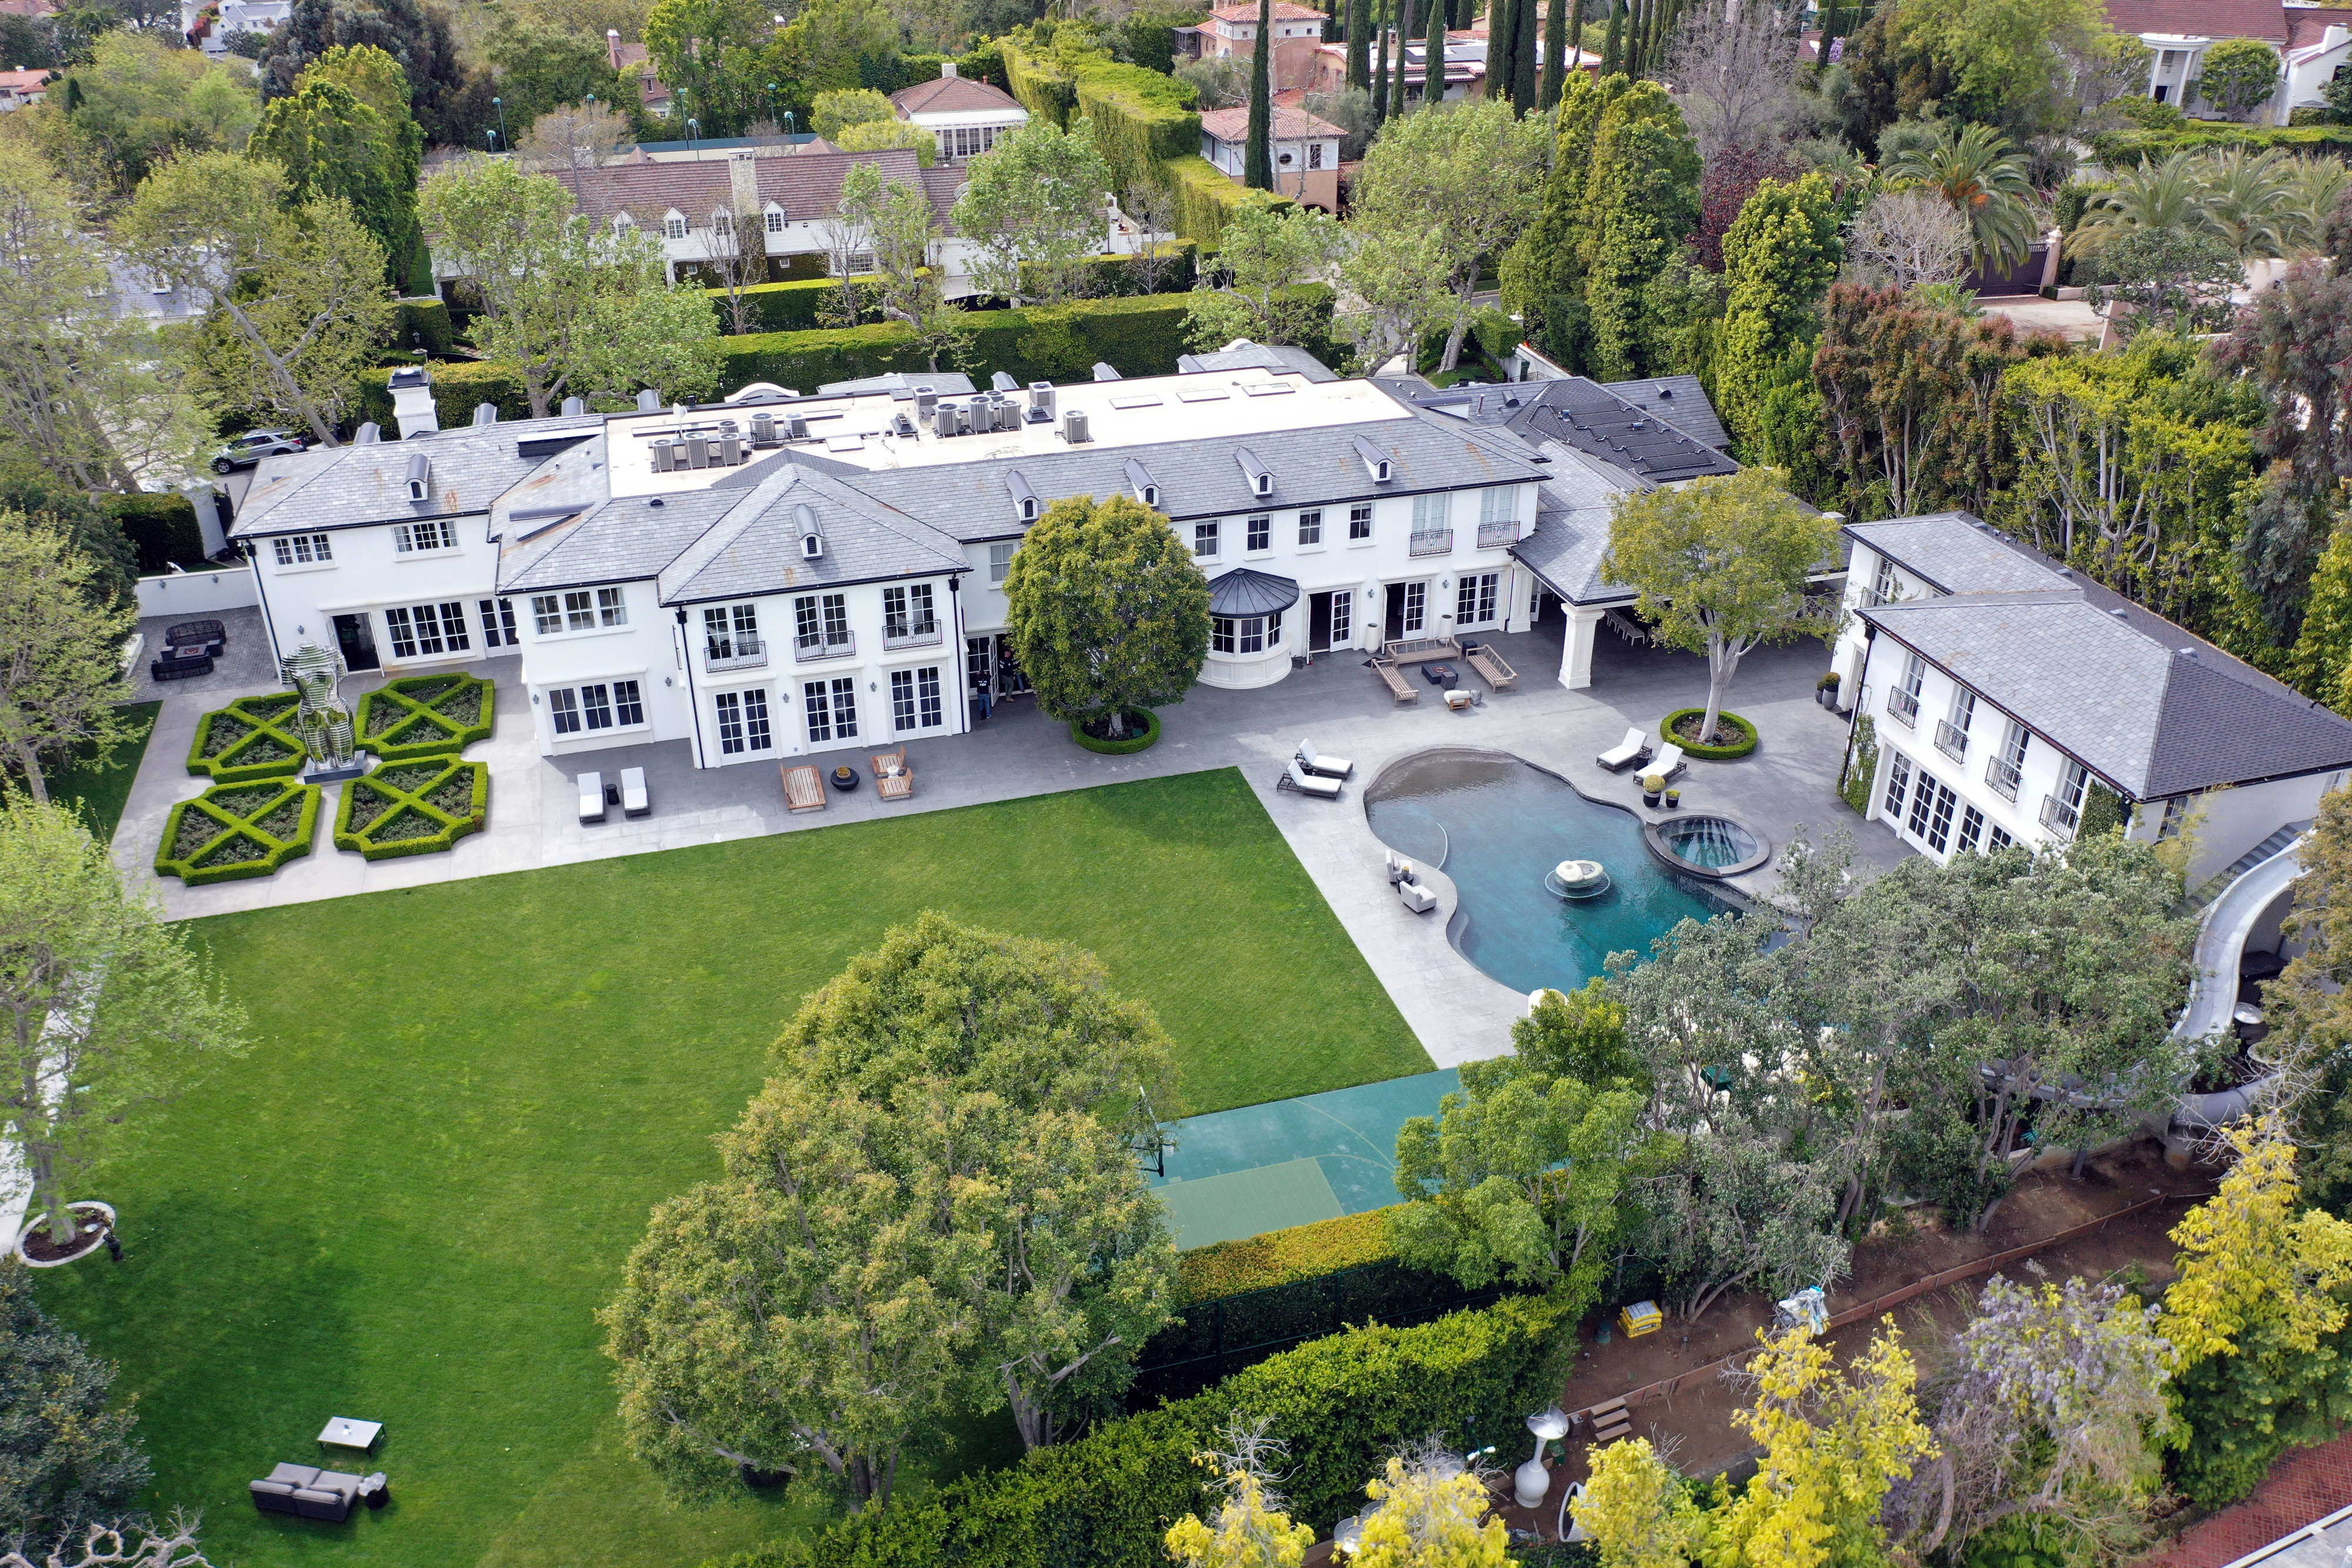 Aerial view of a large estate with sprawling lawns and a pool